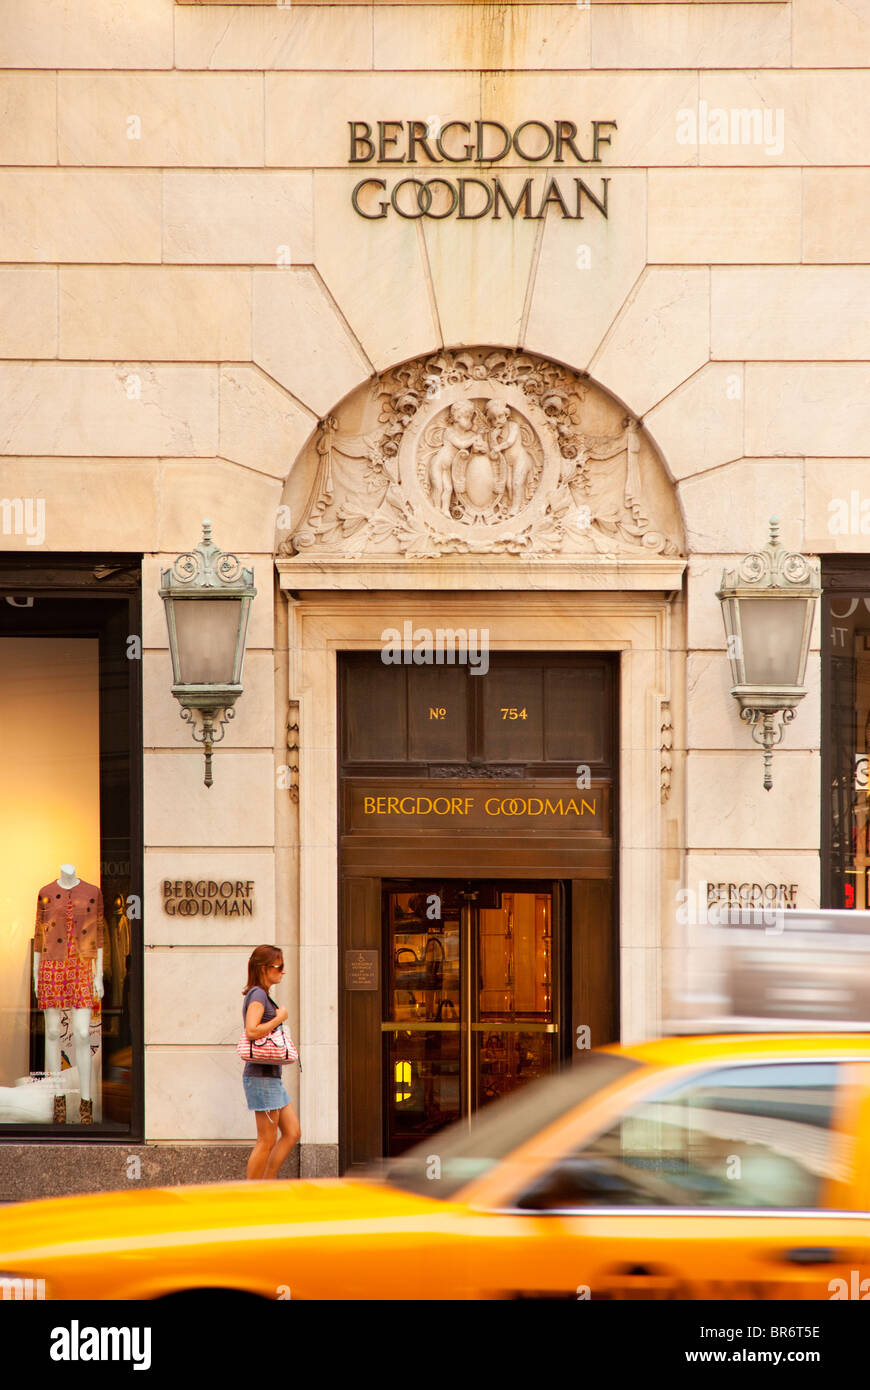 Shopping at Bergdorf and Goodman - one of the famous 'B's' of shopping in Manhattan, New York City USA Stock Photo